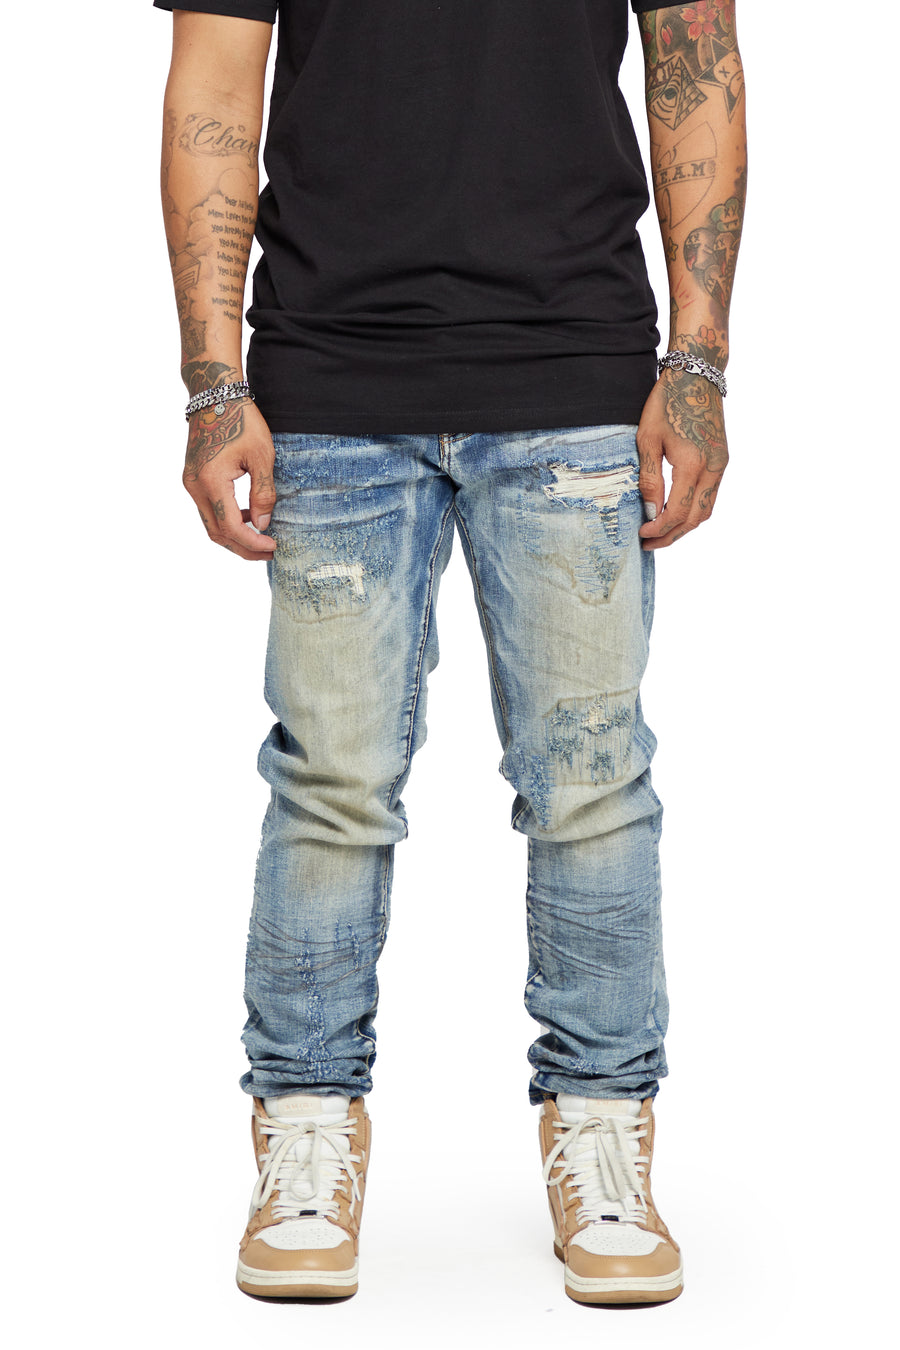 VALABASAS JEANS “ONLY LOVE” EARTH WASHED